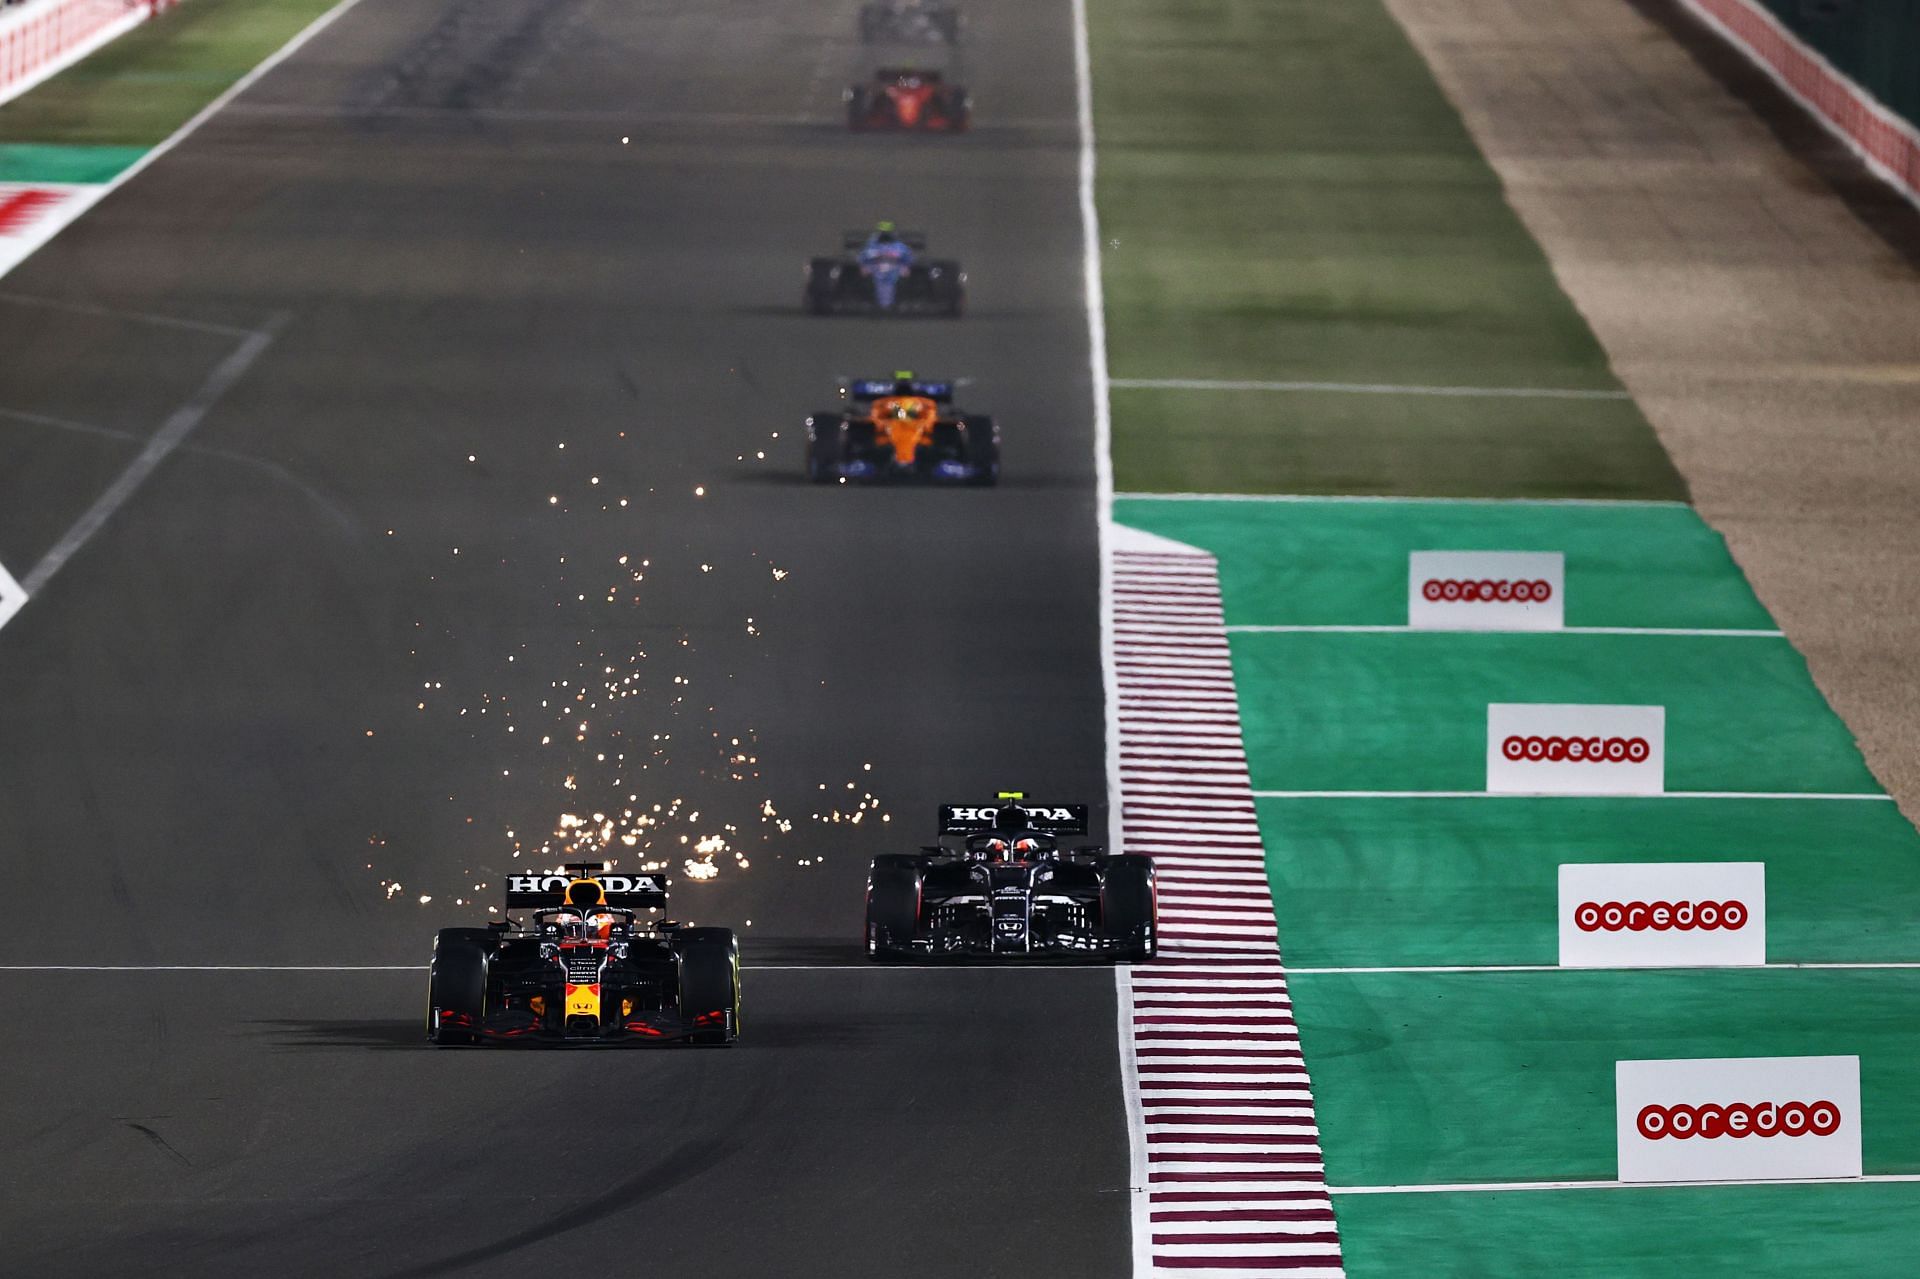 Max Verstappen passing Pierre Gasly in the race at the Losail Internatioal circuit in Qatar.